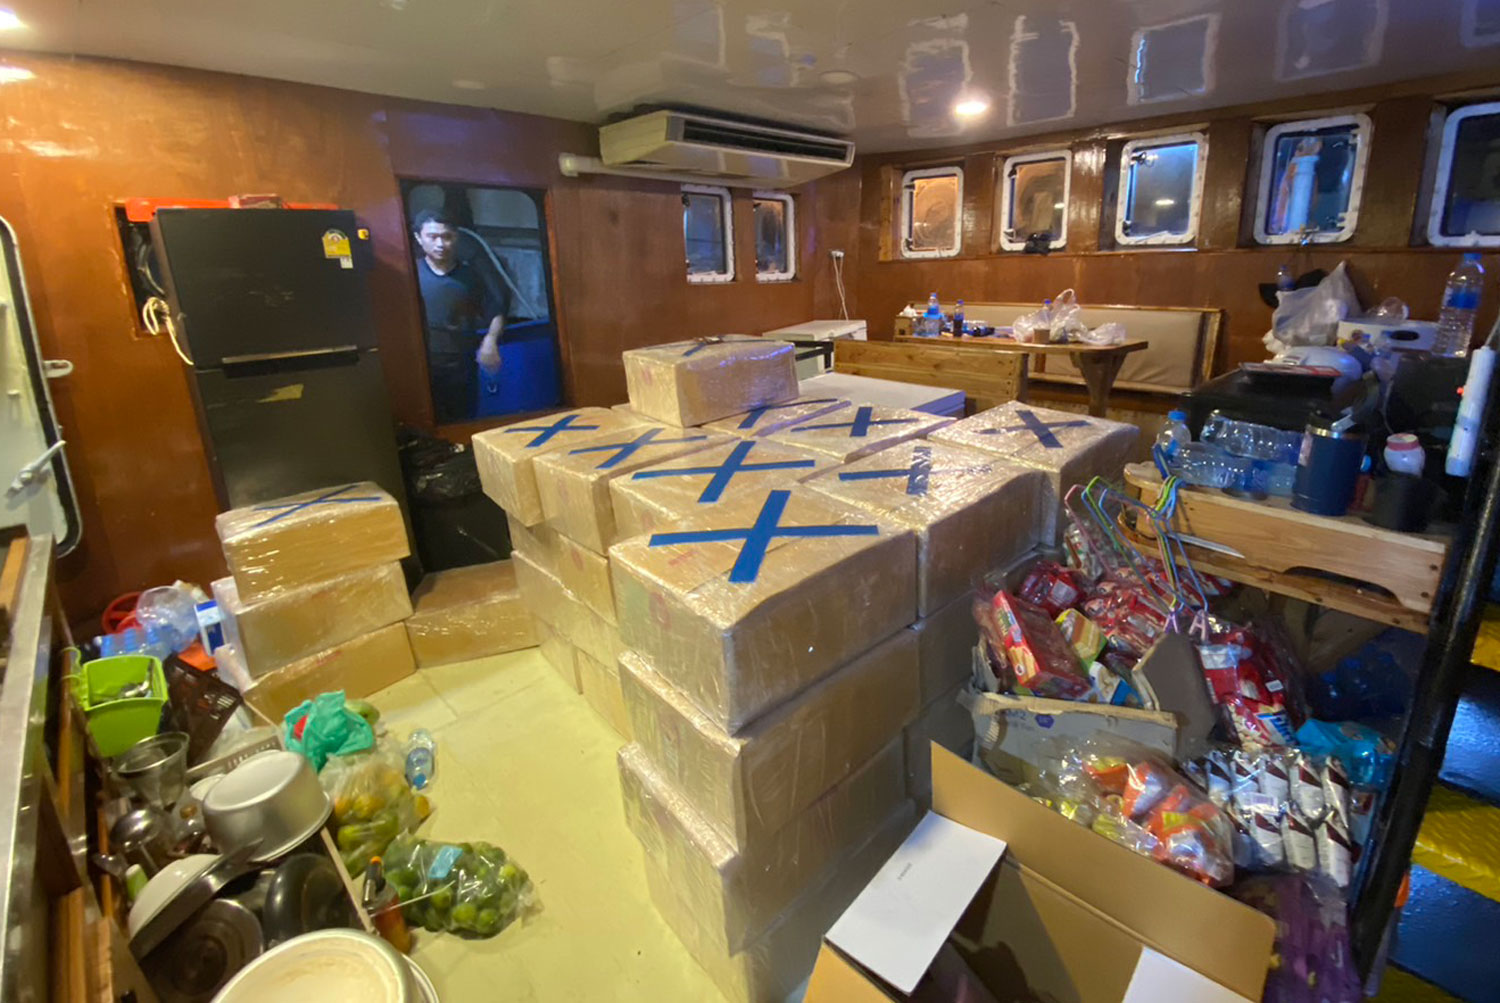 Police Seizes 2 Tons of Crystal Meth